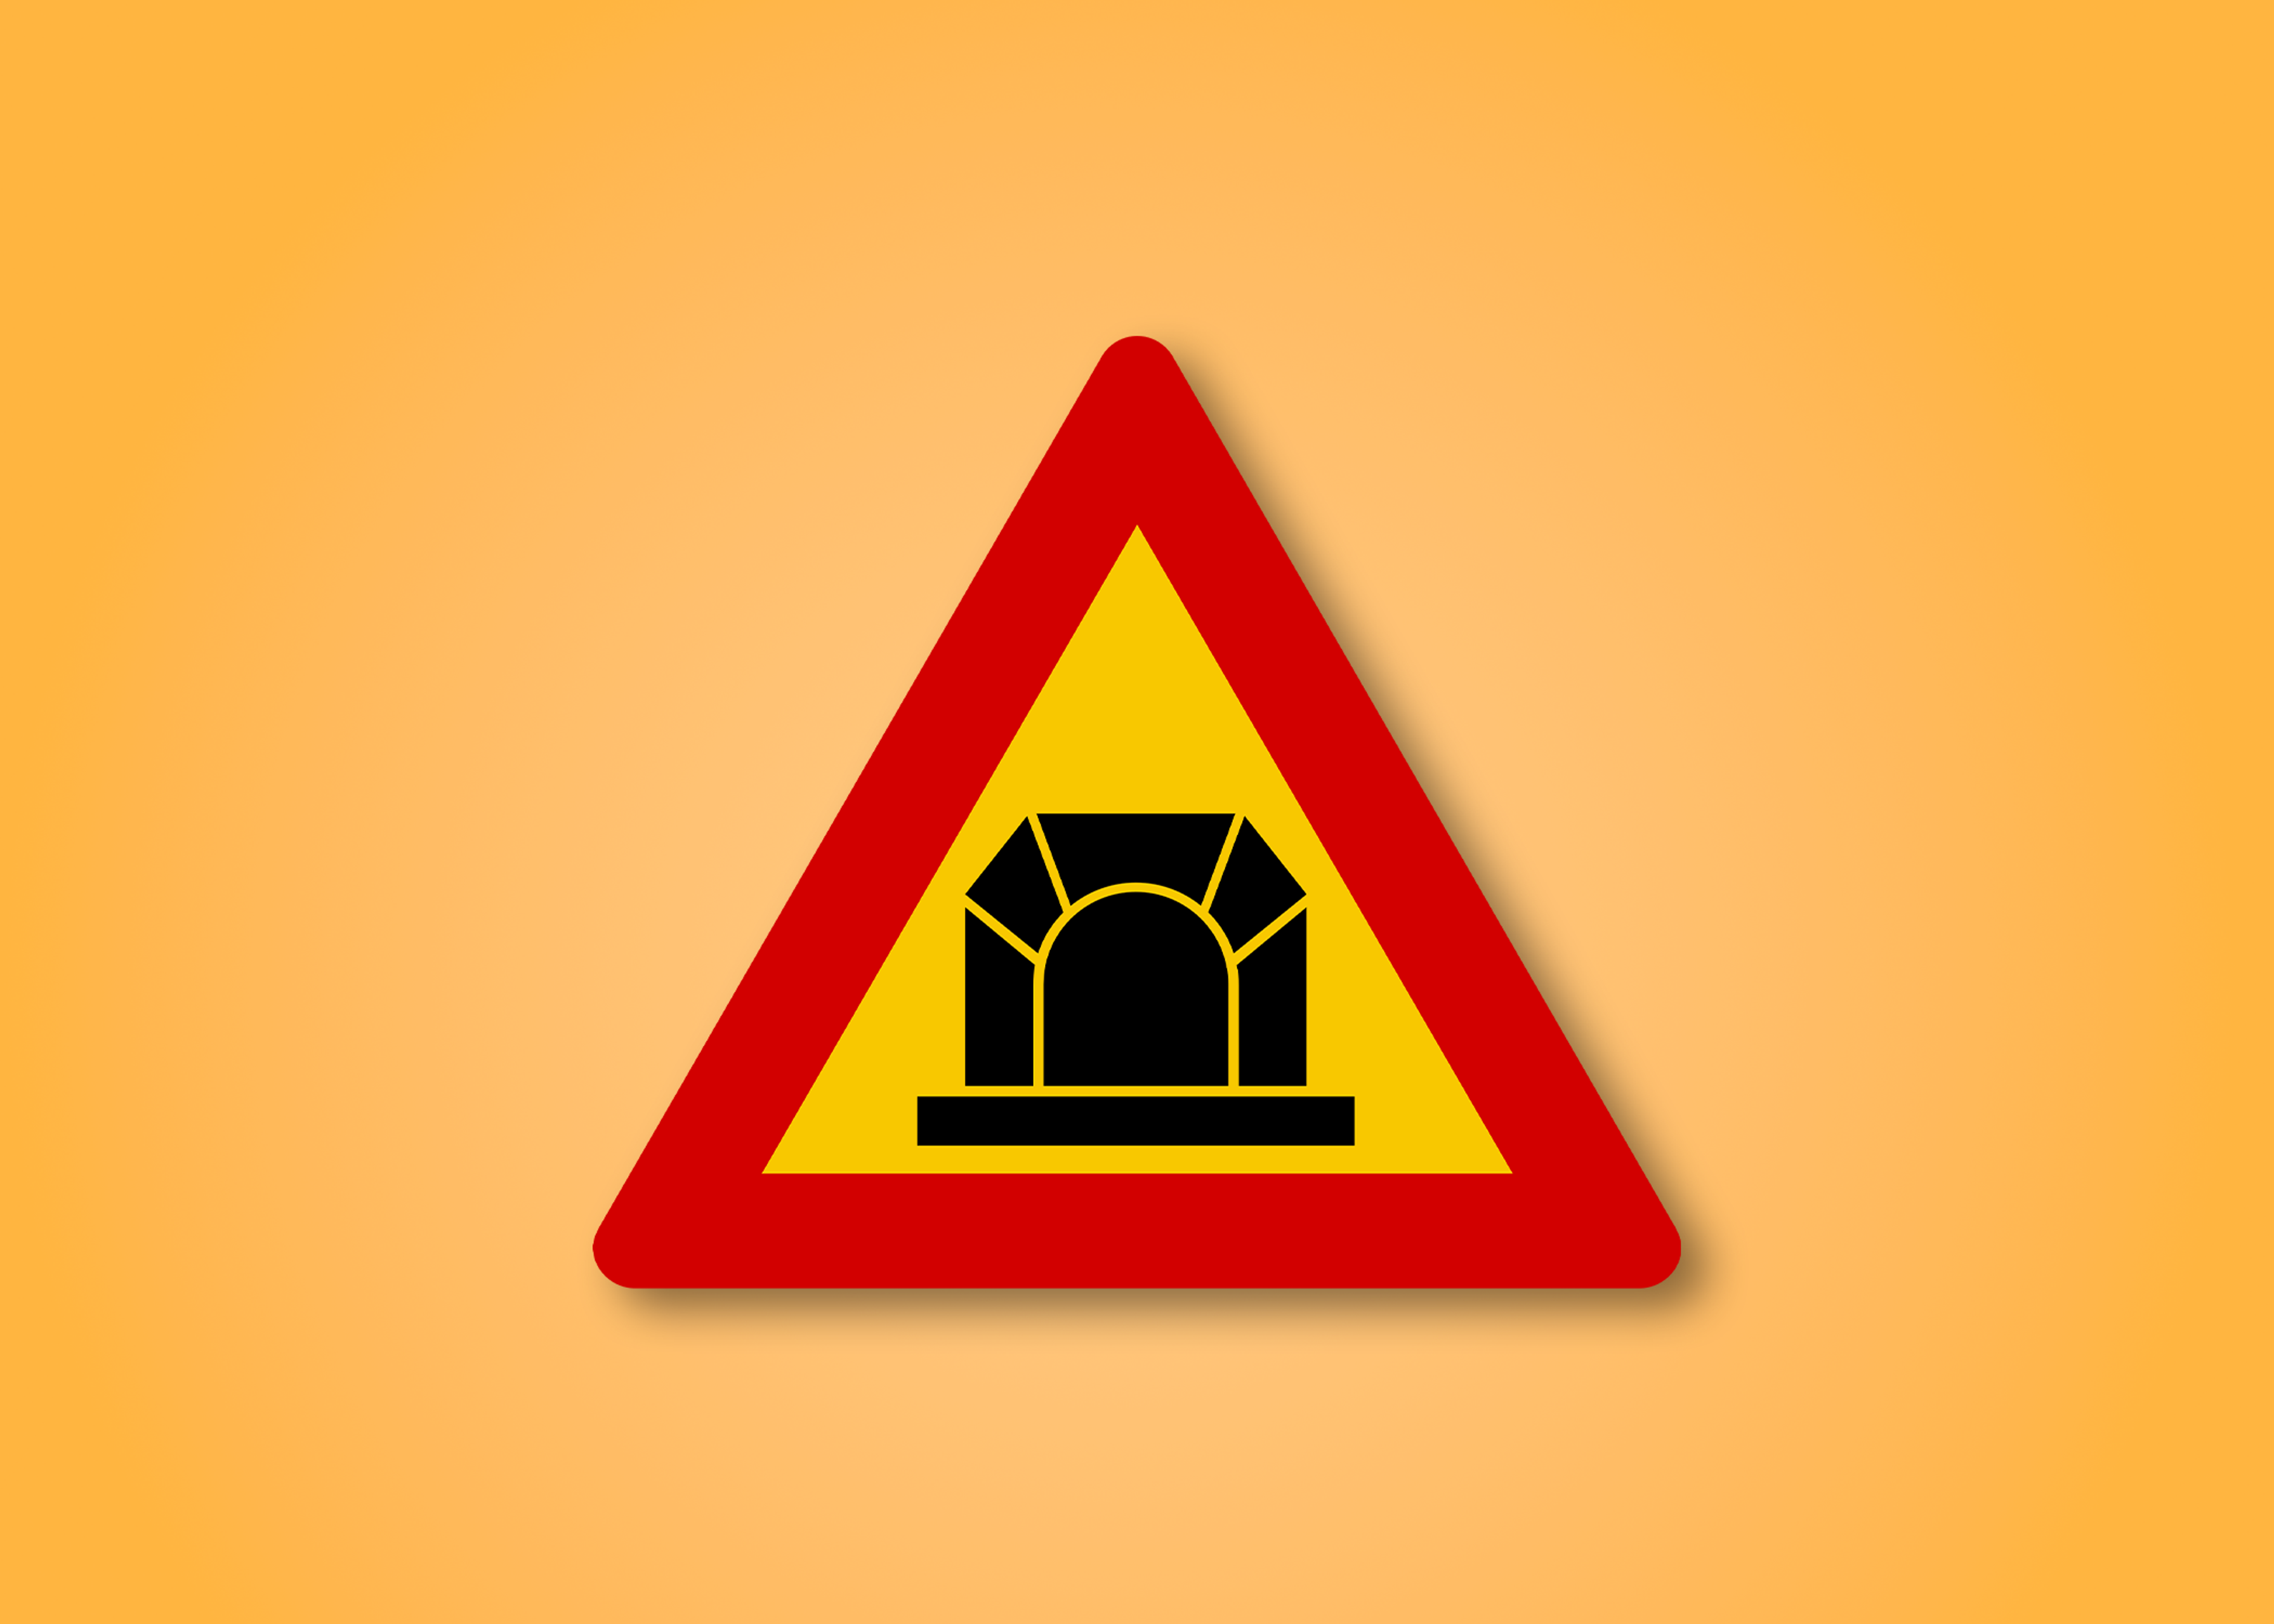 Red and yellow triangle road sign with a tunnel in the middle. This road sign means Tunnel Ahead